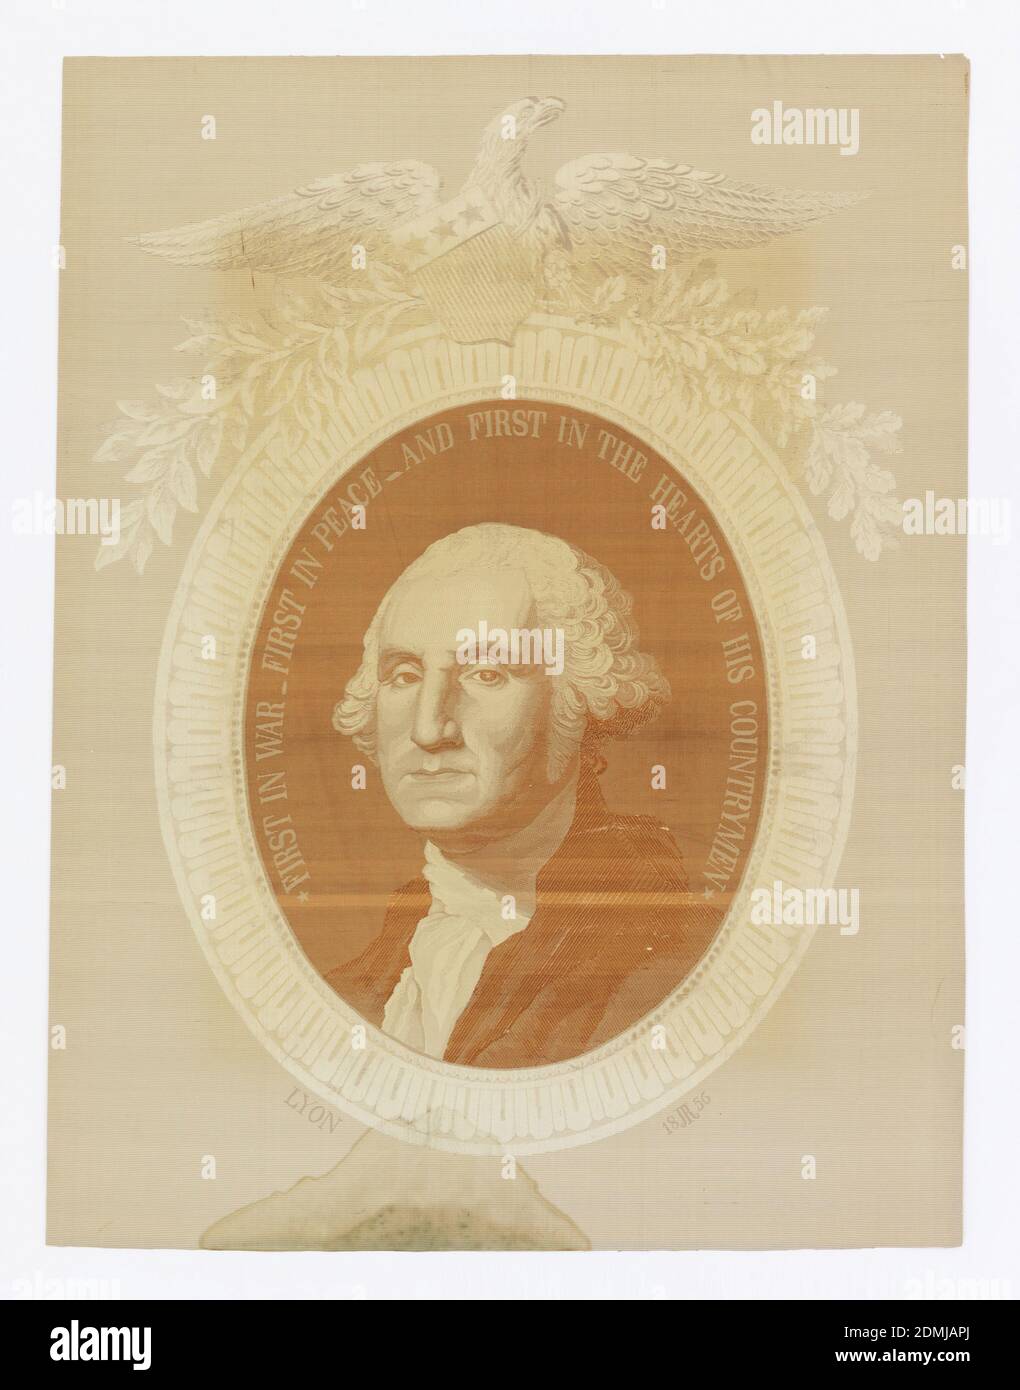 Portrait of George Washington, Medium: silk Technique: jacquard-woven damask, Woven portrait of George Washington within an eagle-crested cartouche. Woven, above Washington’s head: First in War First in Peace and First in the Hearts of His Countrymen., Lyon, France, 1856, woven textiles, Portrait of George Washington Stock Photo